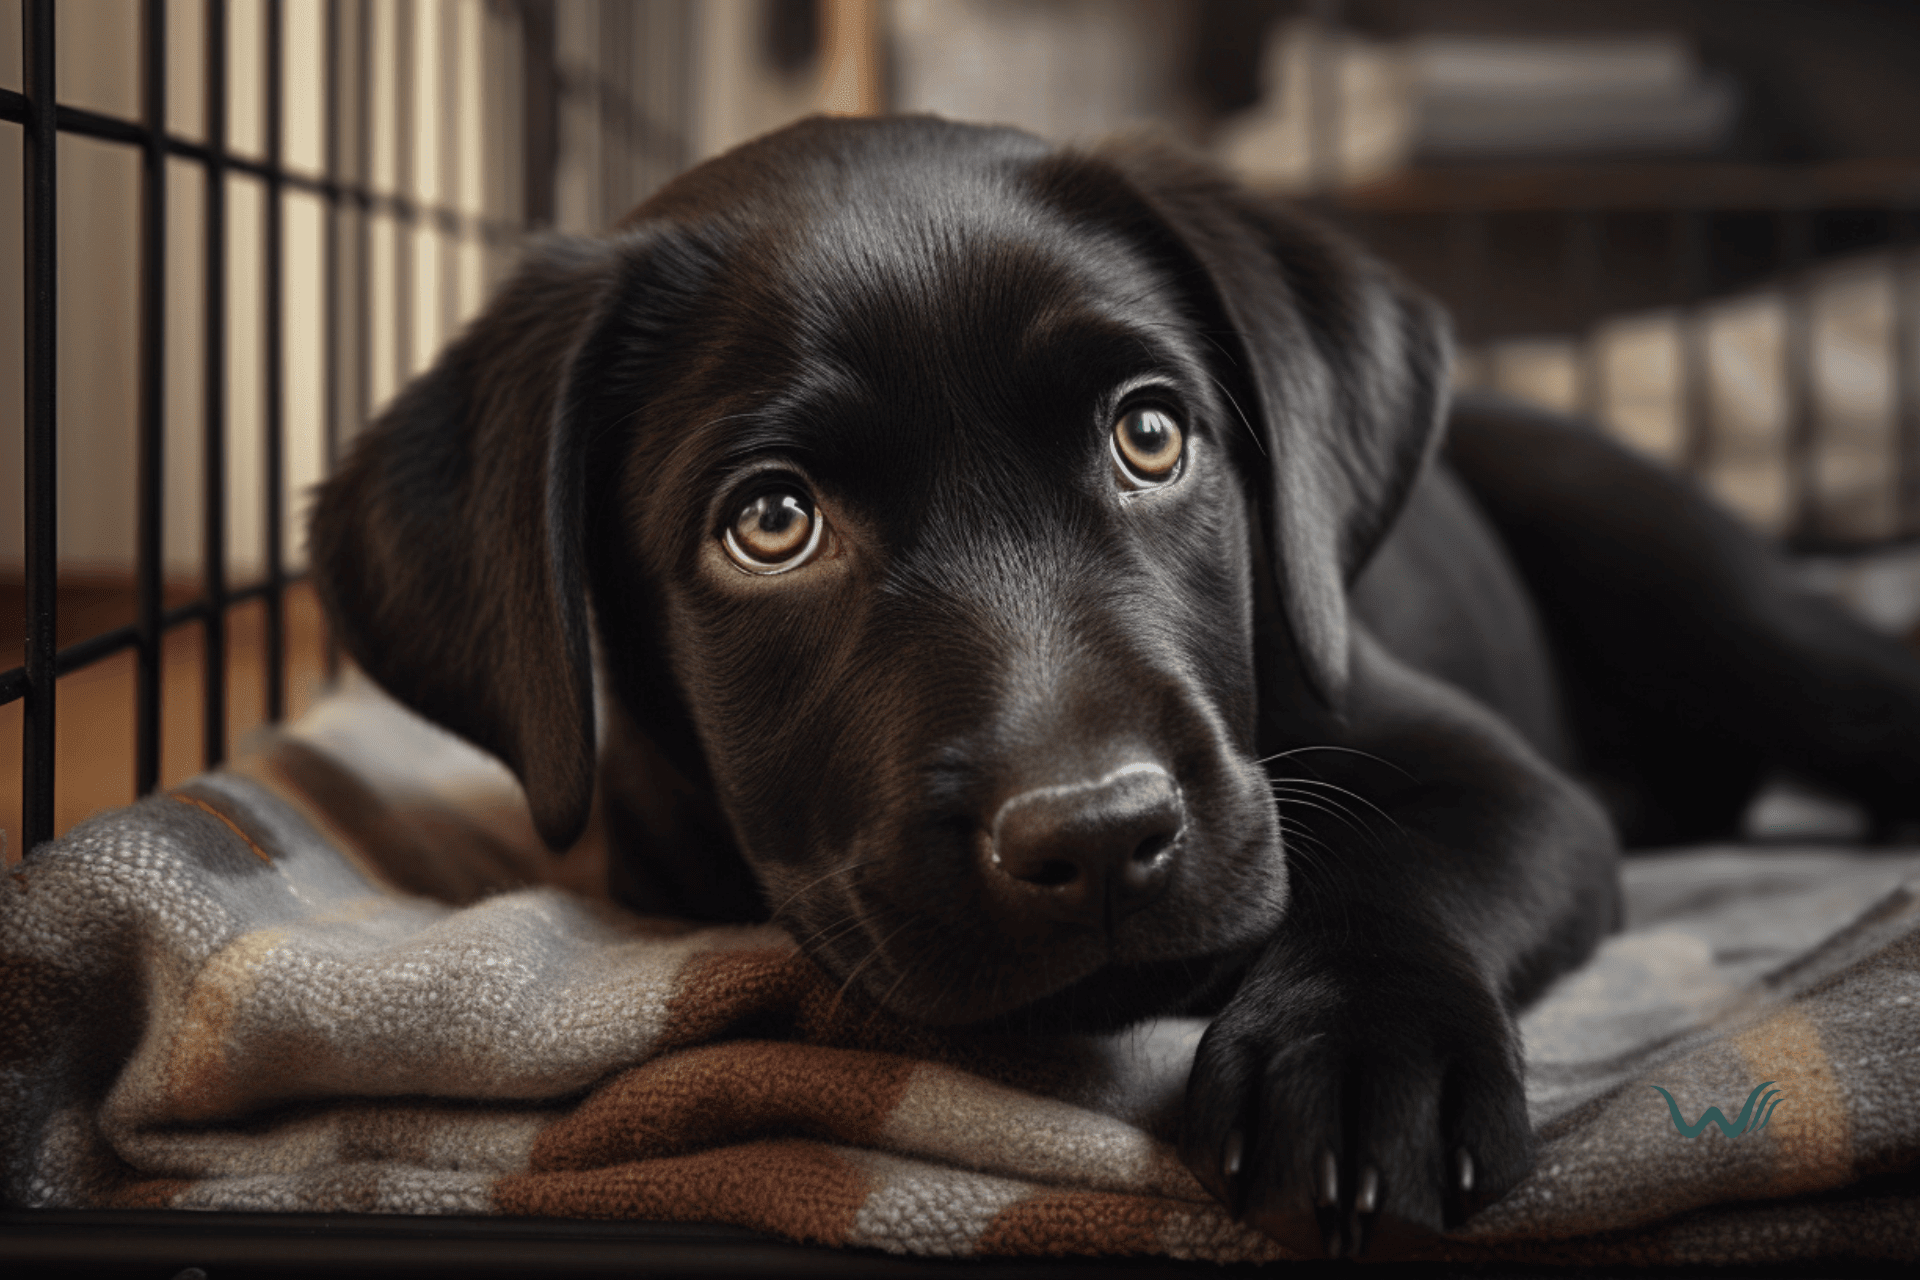 7 tips for crate training a puppy